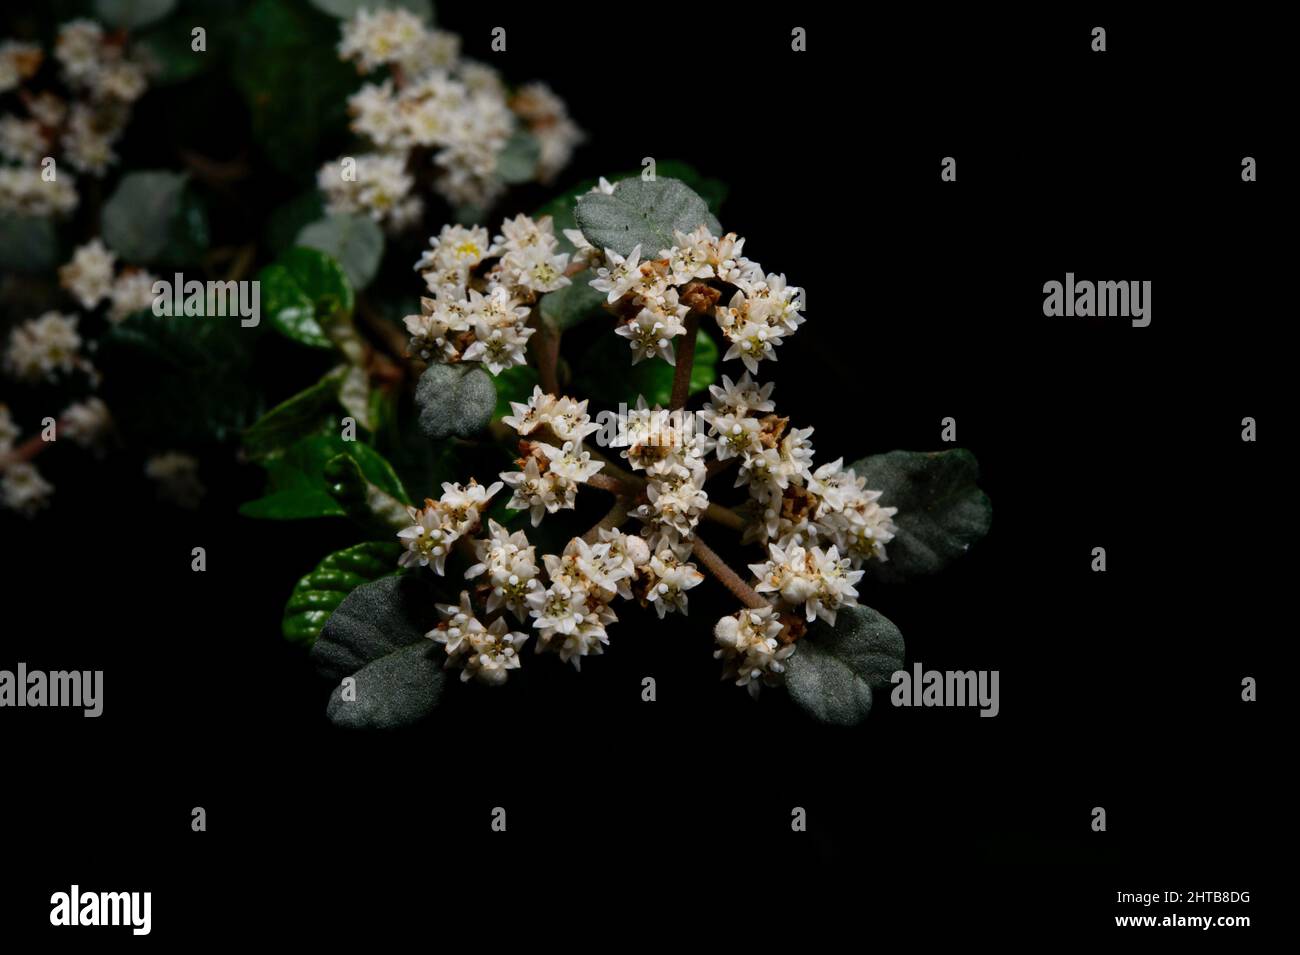 Australian Dusty Miller (Stylidium Parvifolium) is quite common in Australian woodlands, and can form dense thickets, hard to get through. Stock Photo